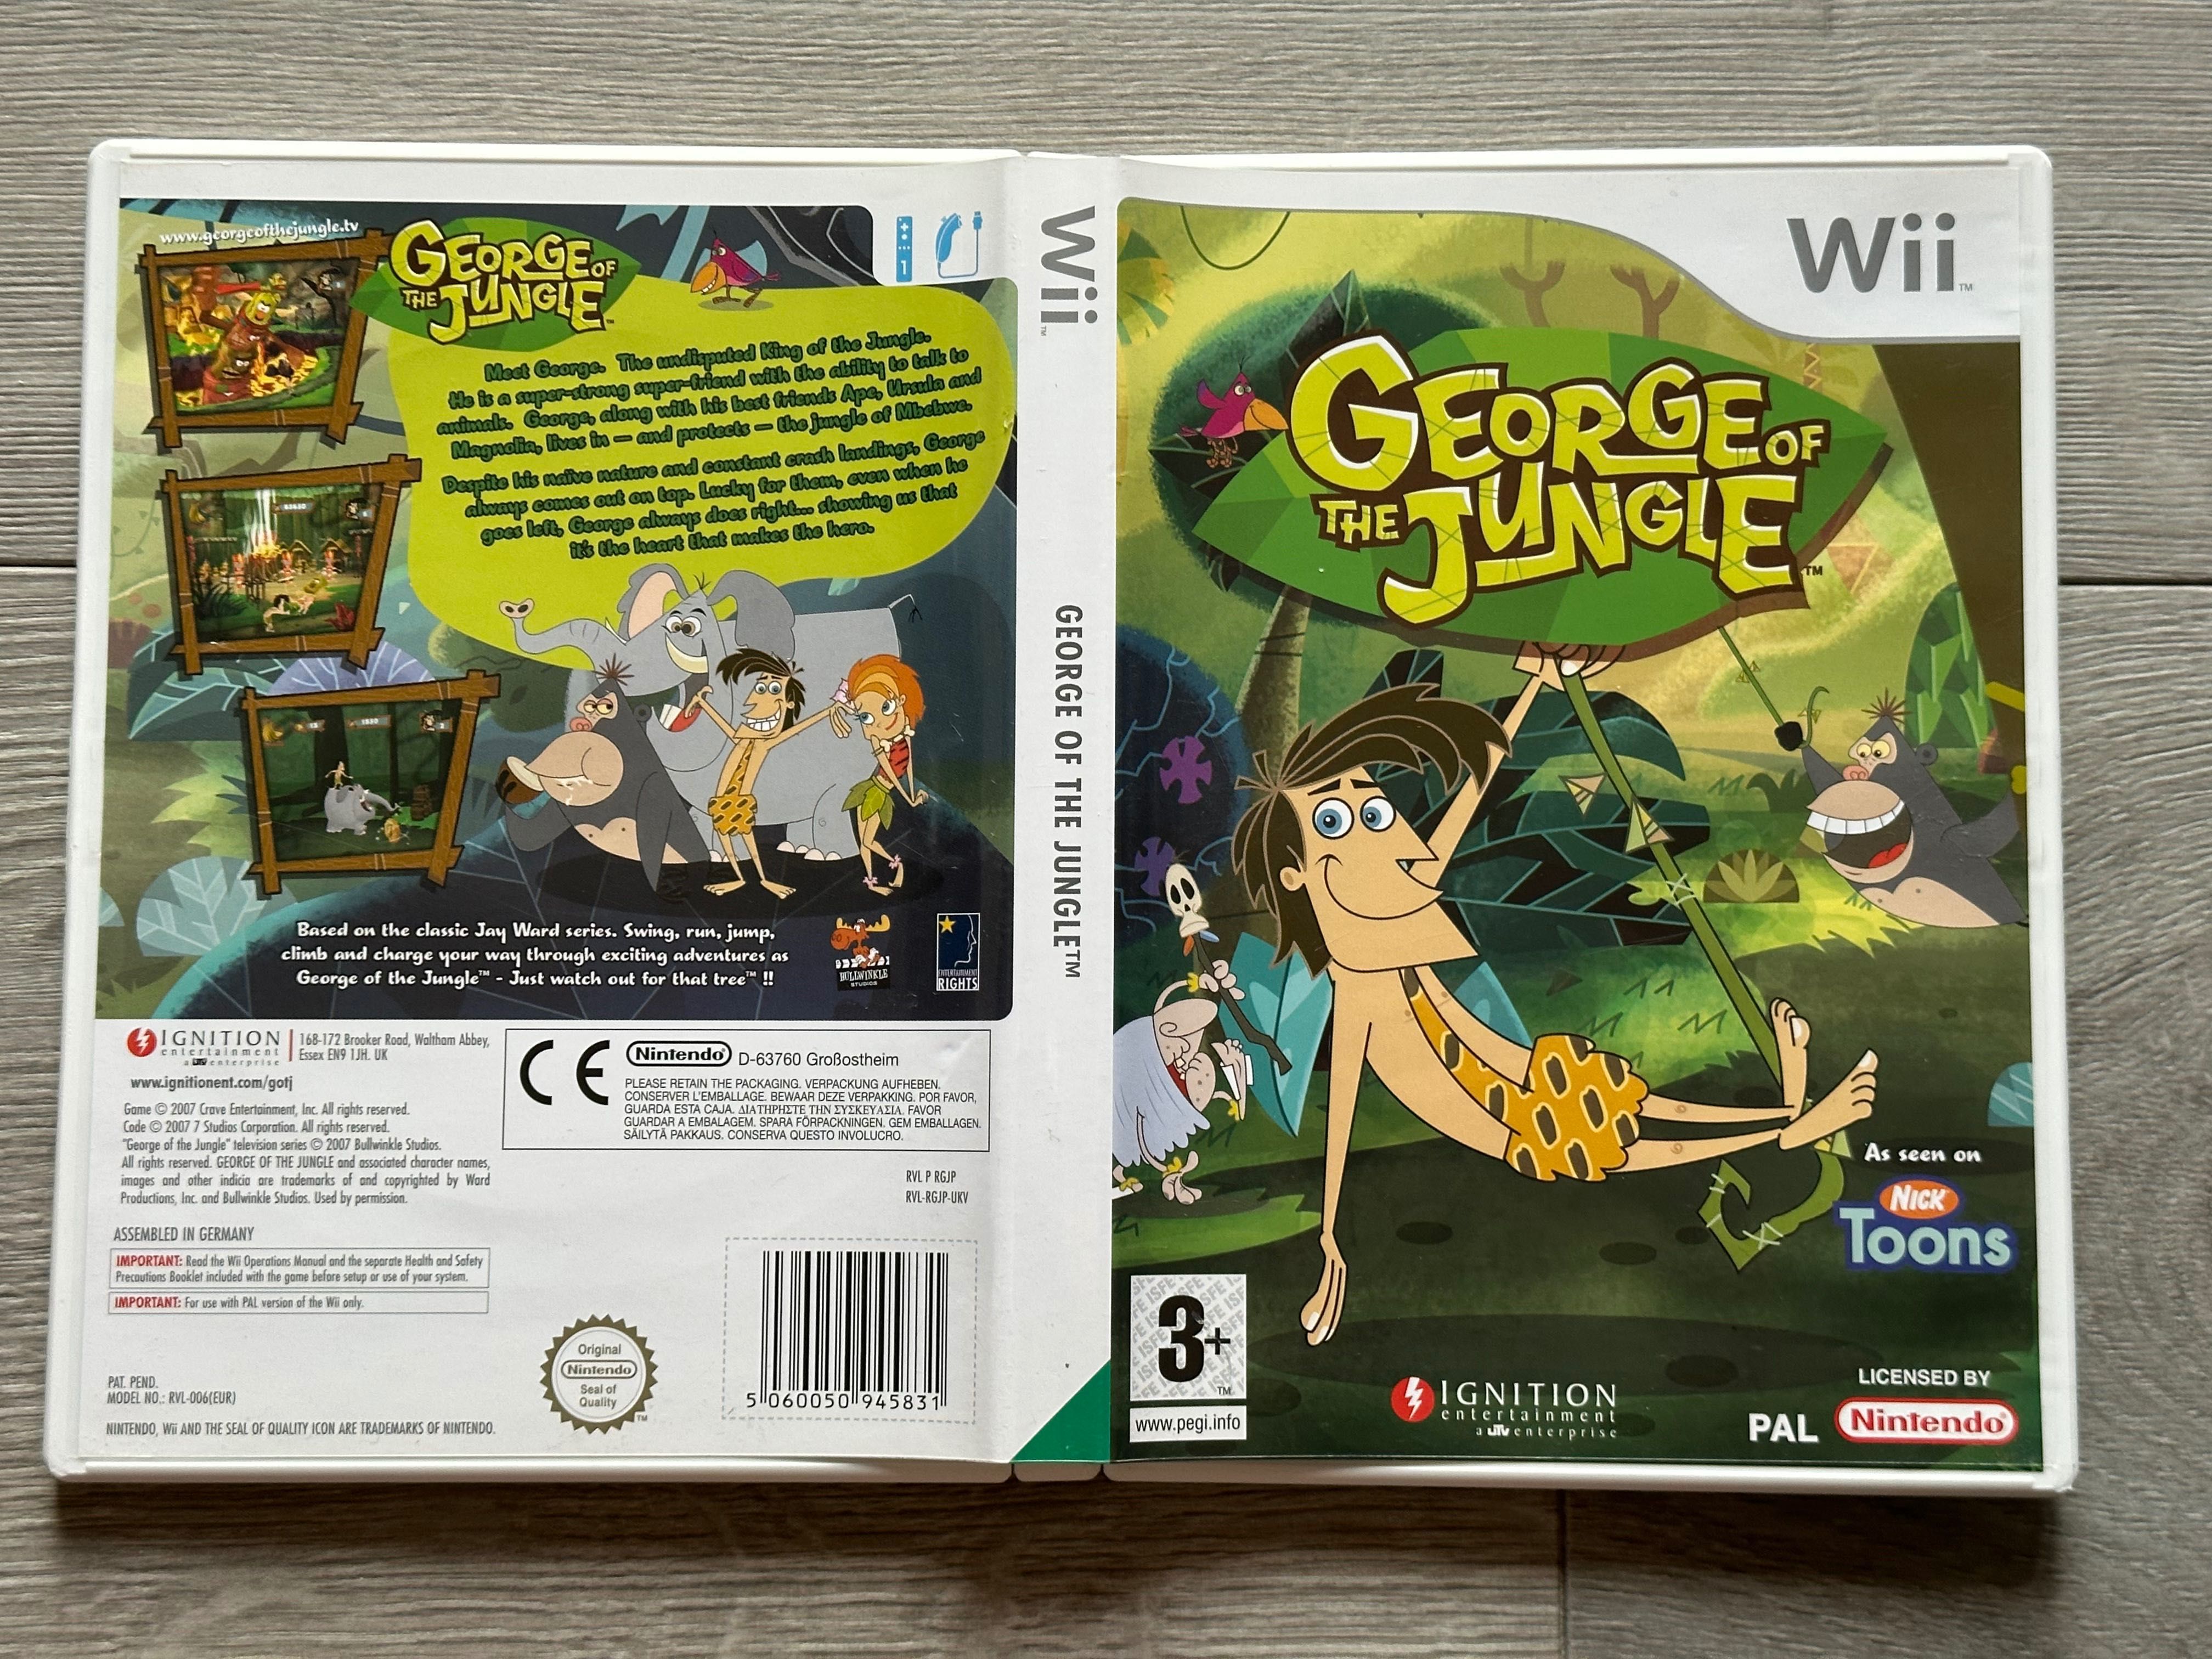 George of the Jungle / Wii